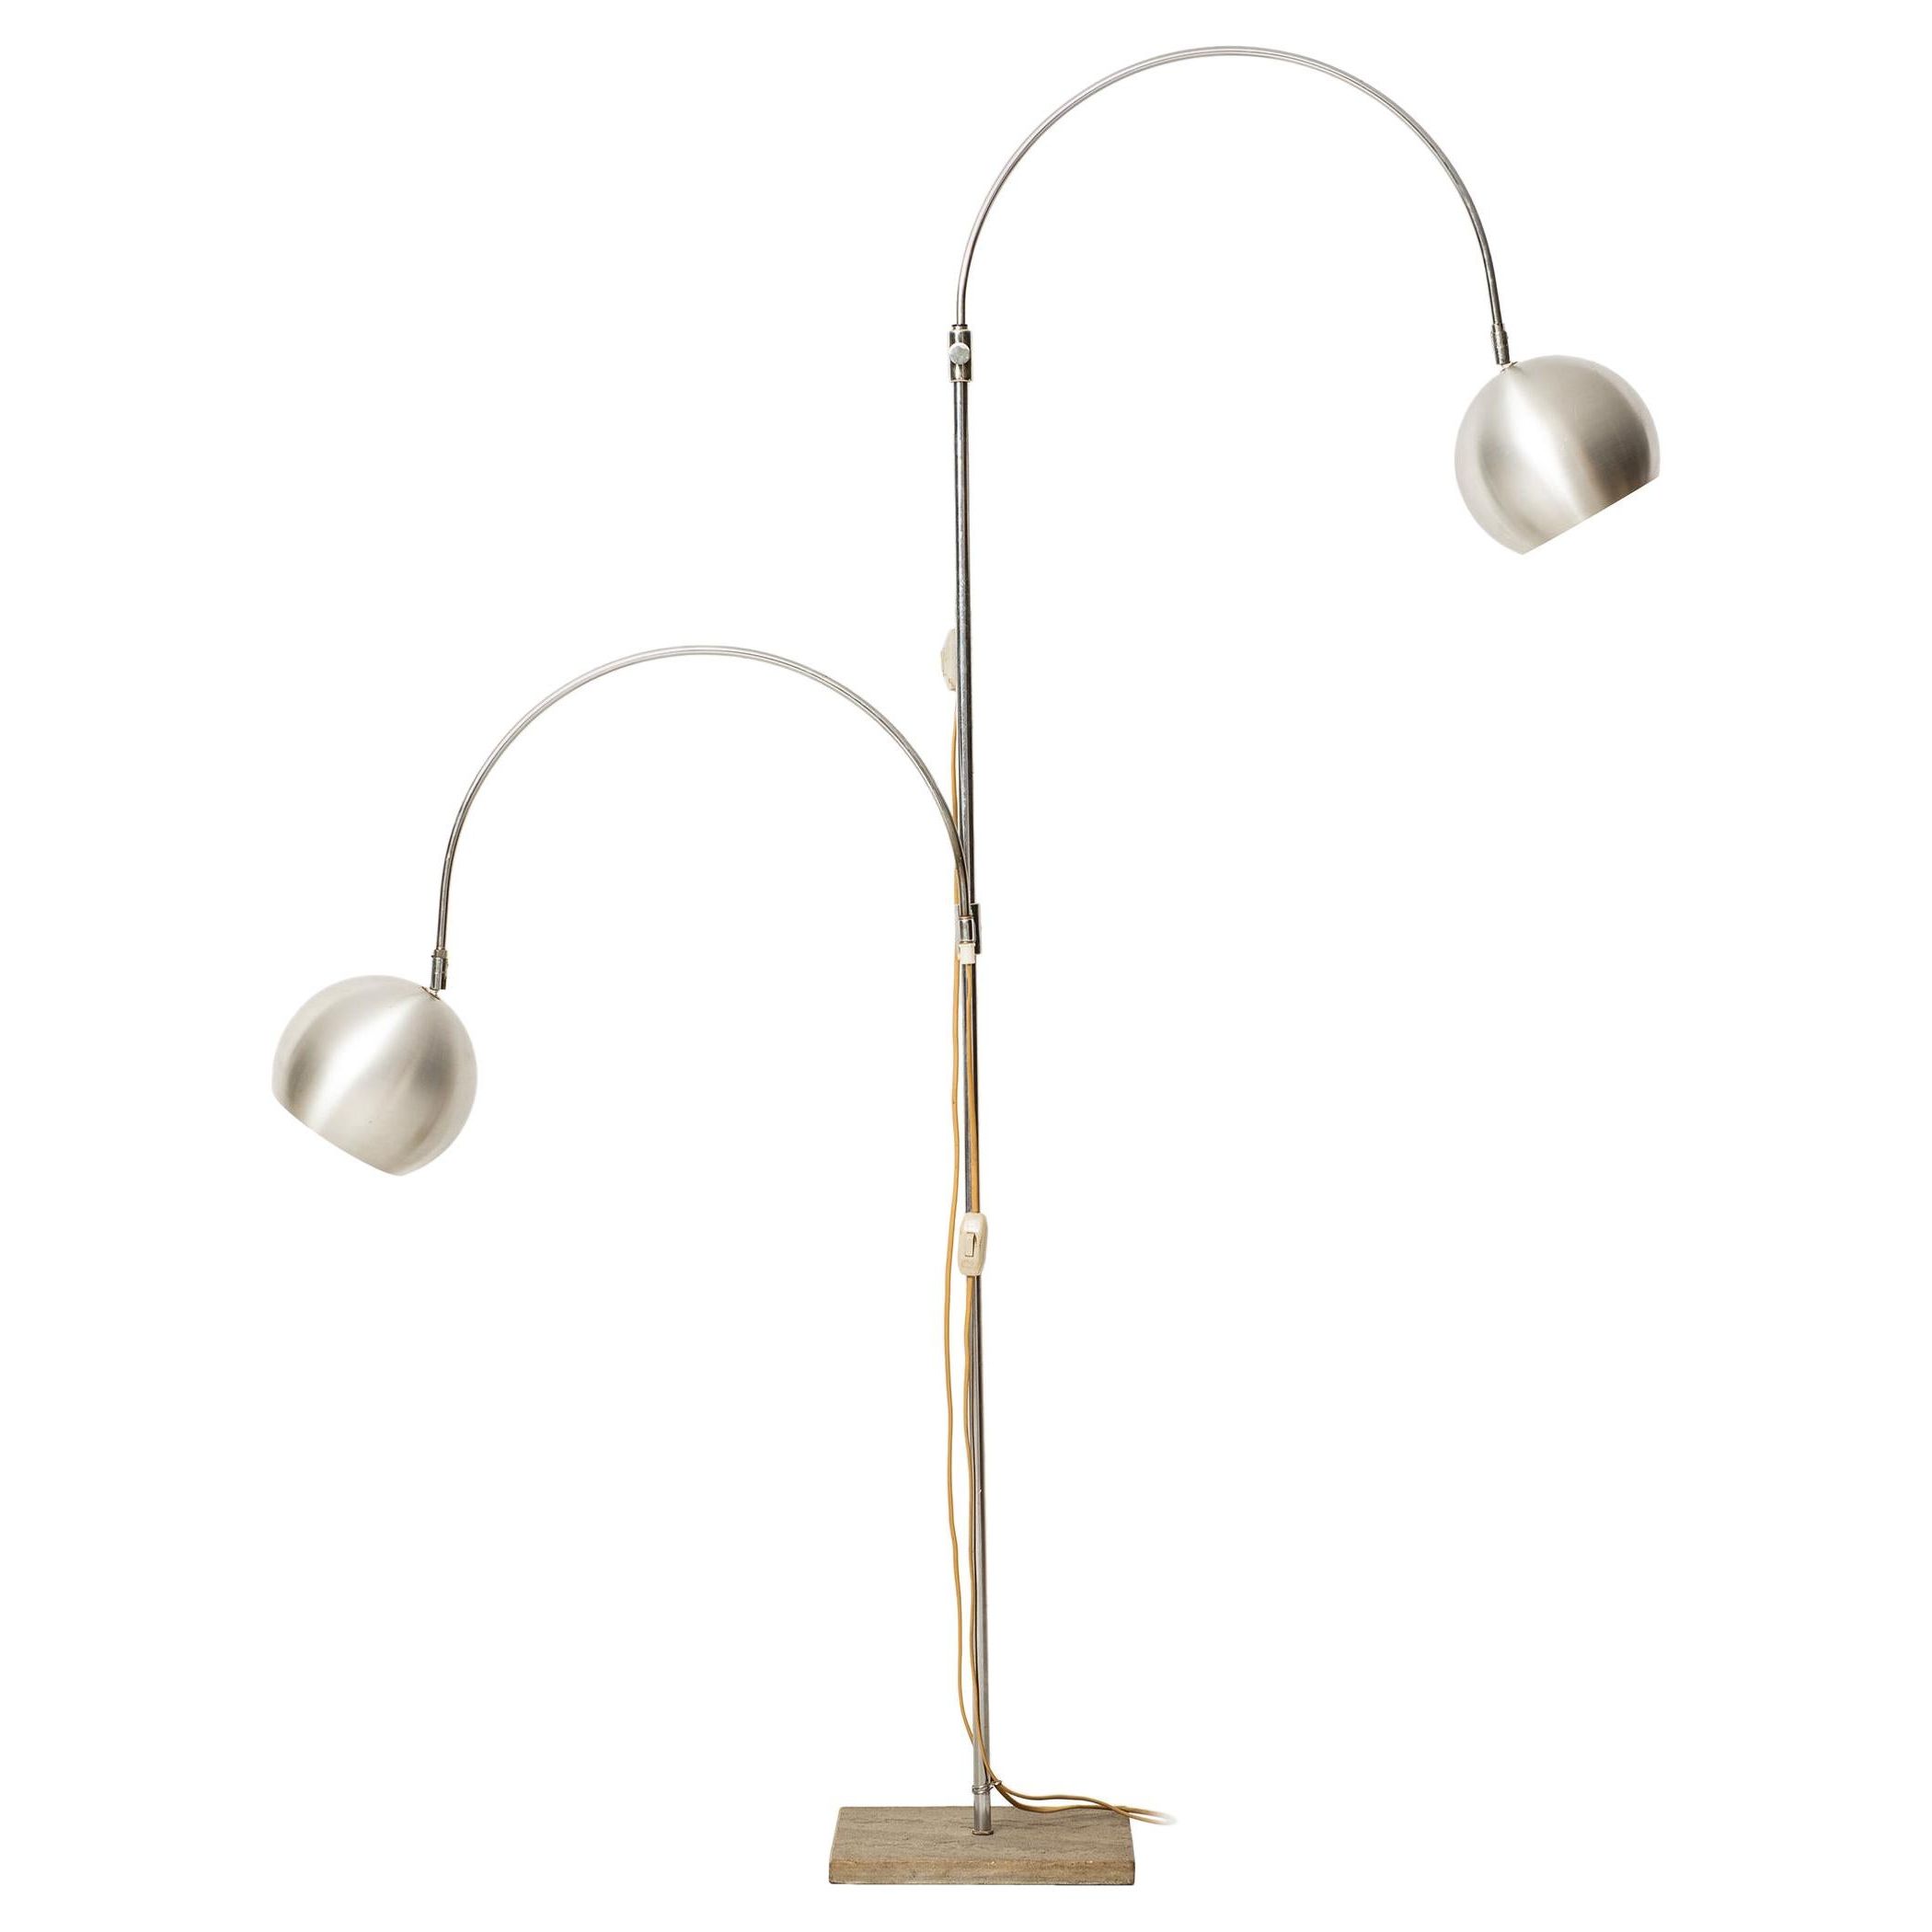 2 Arm Floor Lamps With Recent Large Floor Lamp With 2 Flexible Arms Produced In Italy For Sale At 1stdibs (View 4 of 15)